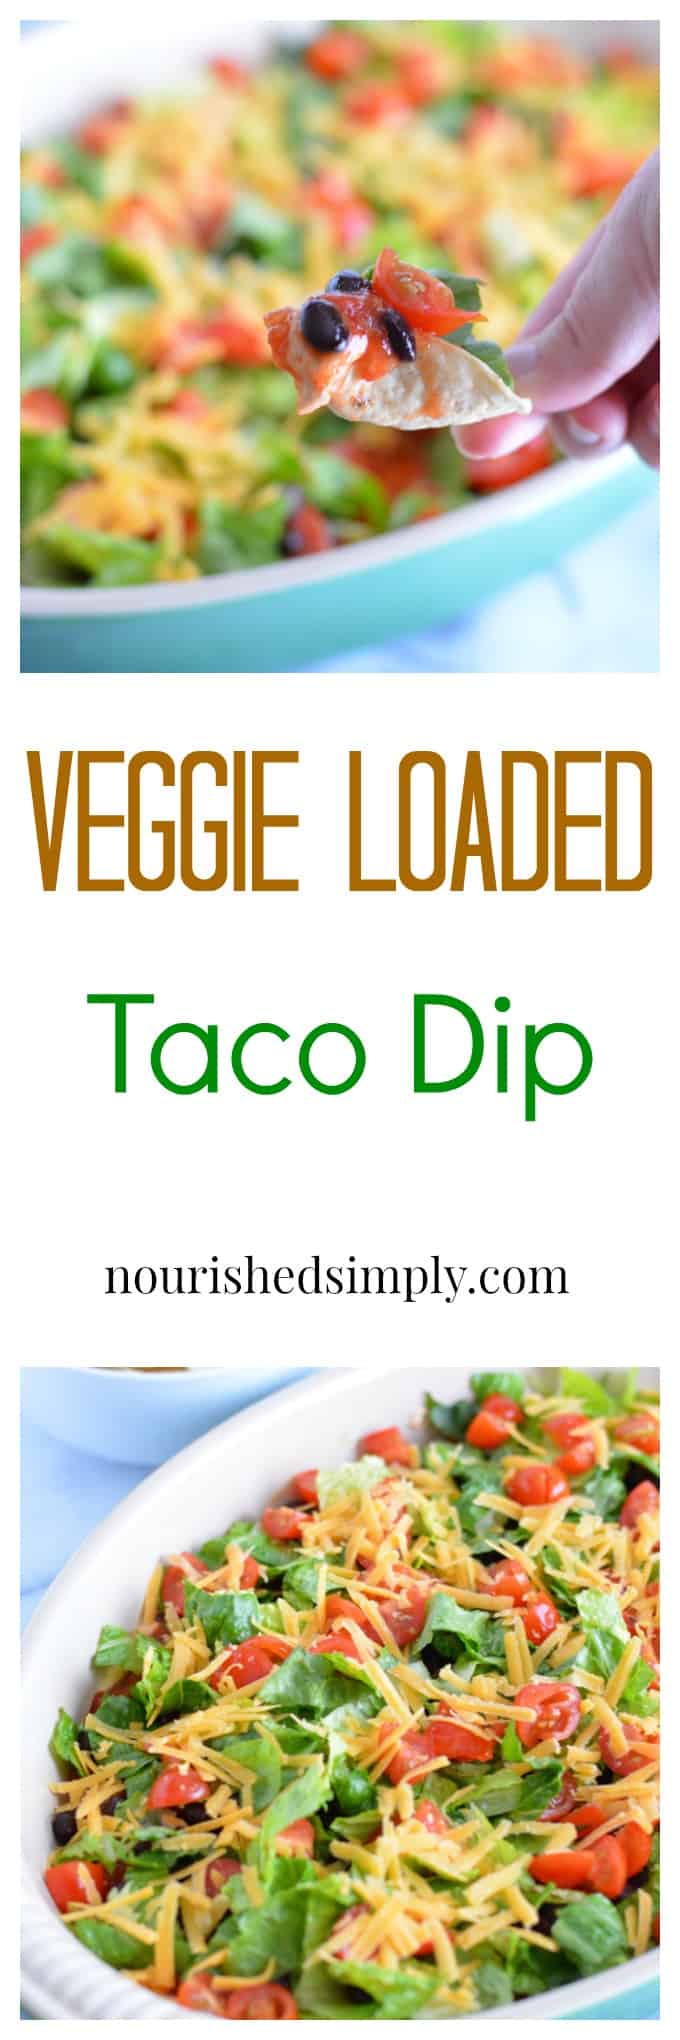 Taco Dip loaded with veggies and lower in calories than traditional taco dip. Why not add a better for you snack to the menu of your next party?